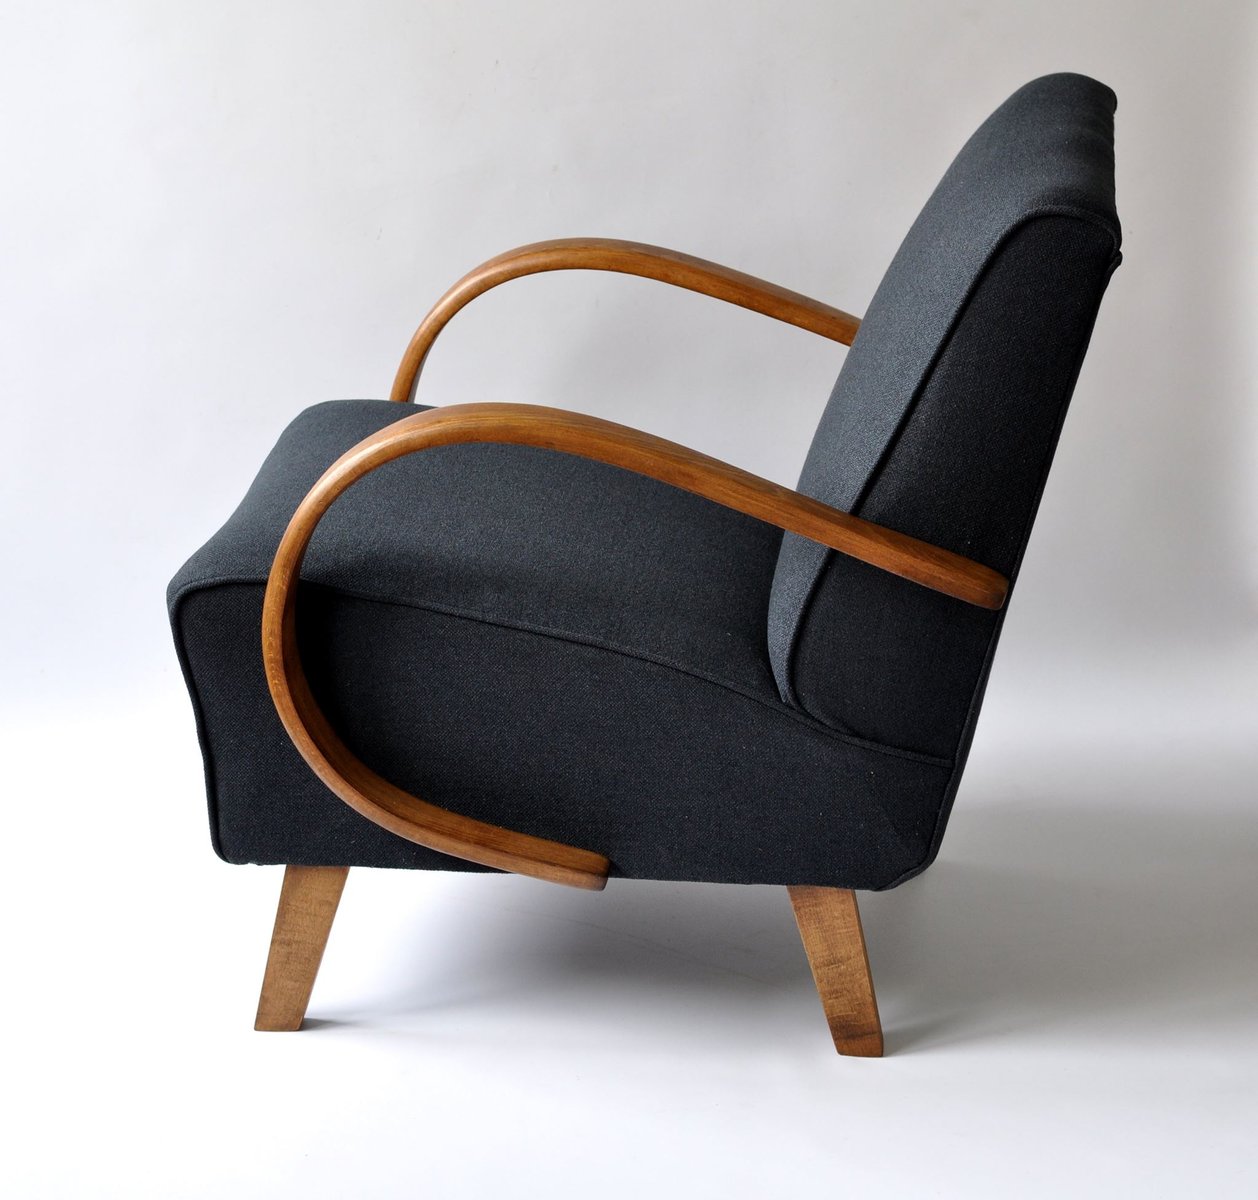 Navy Blue Armchair by Jindrich Halabala, 1940s for sale at Pamono